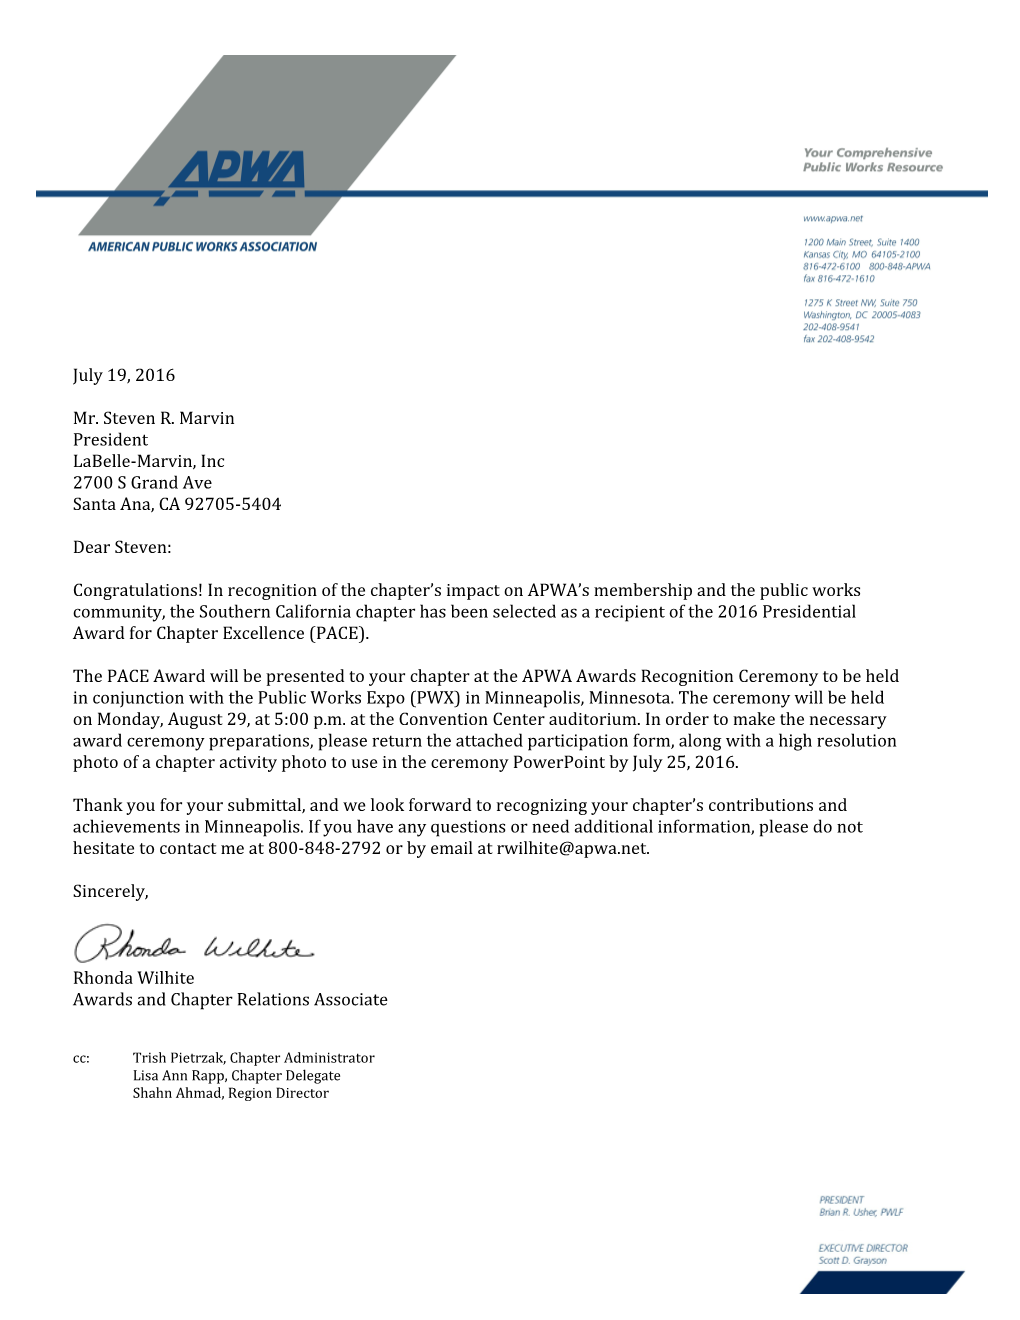 Congratulations! in Recognition of the Chapter S Impact on APWA S Membership and the Public